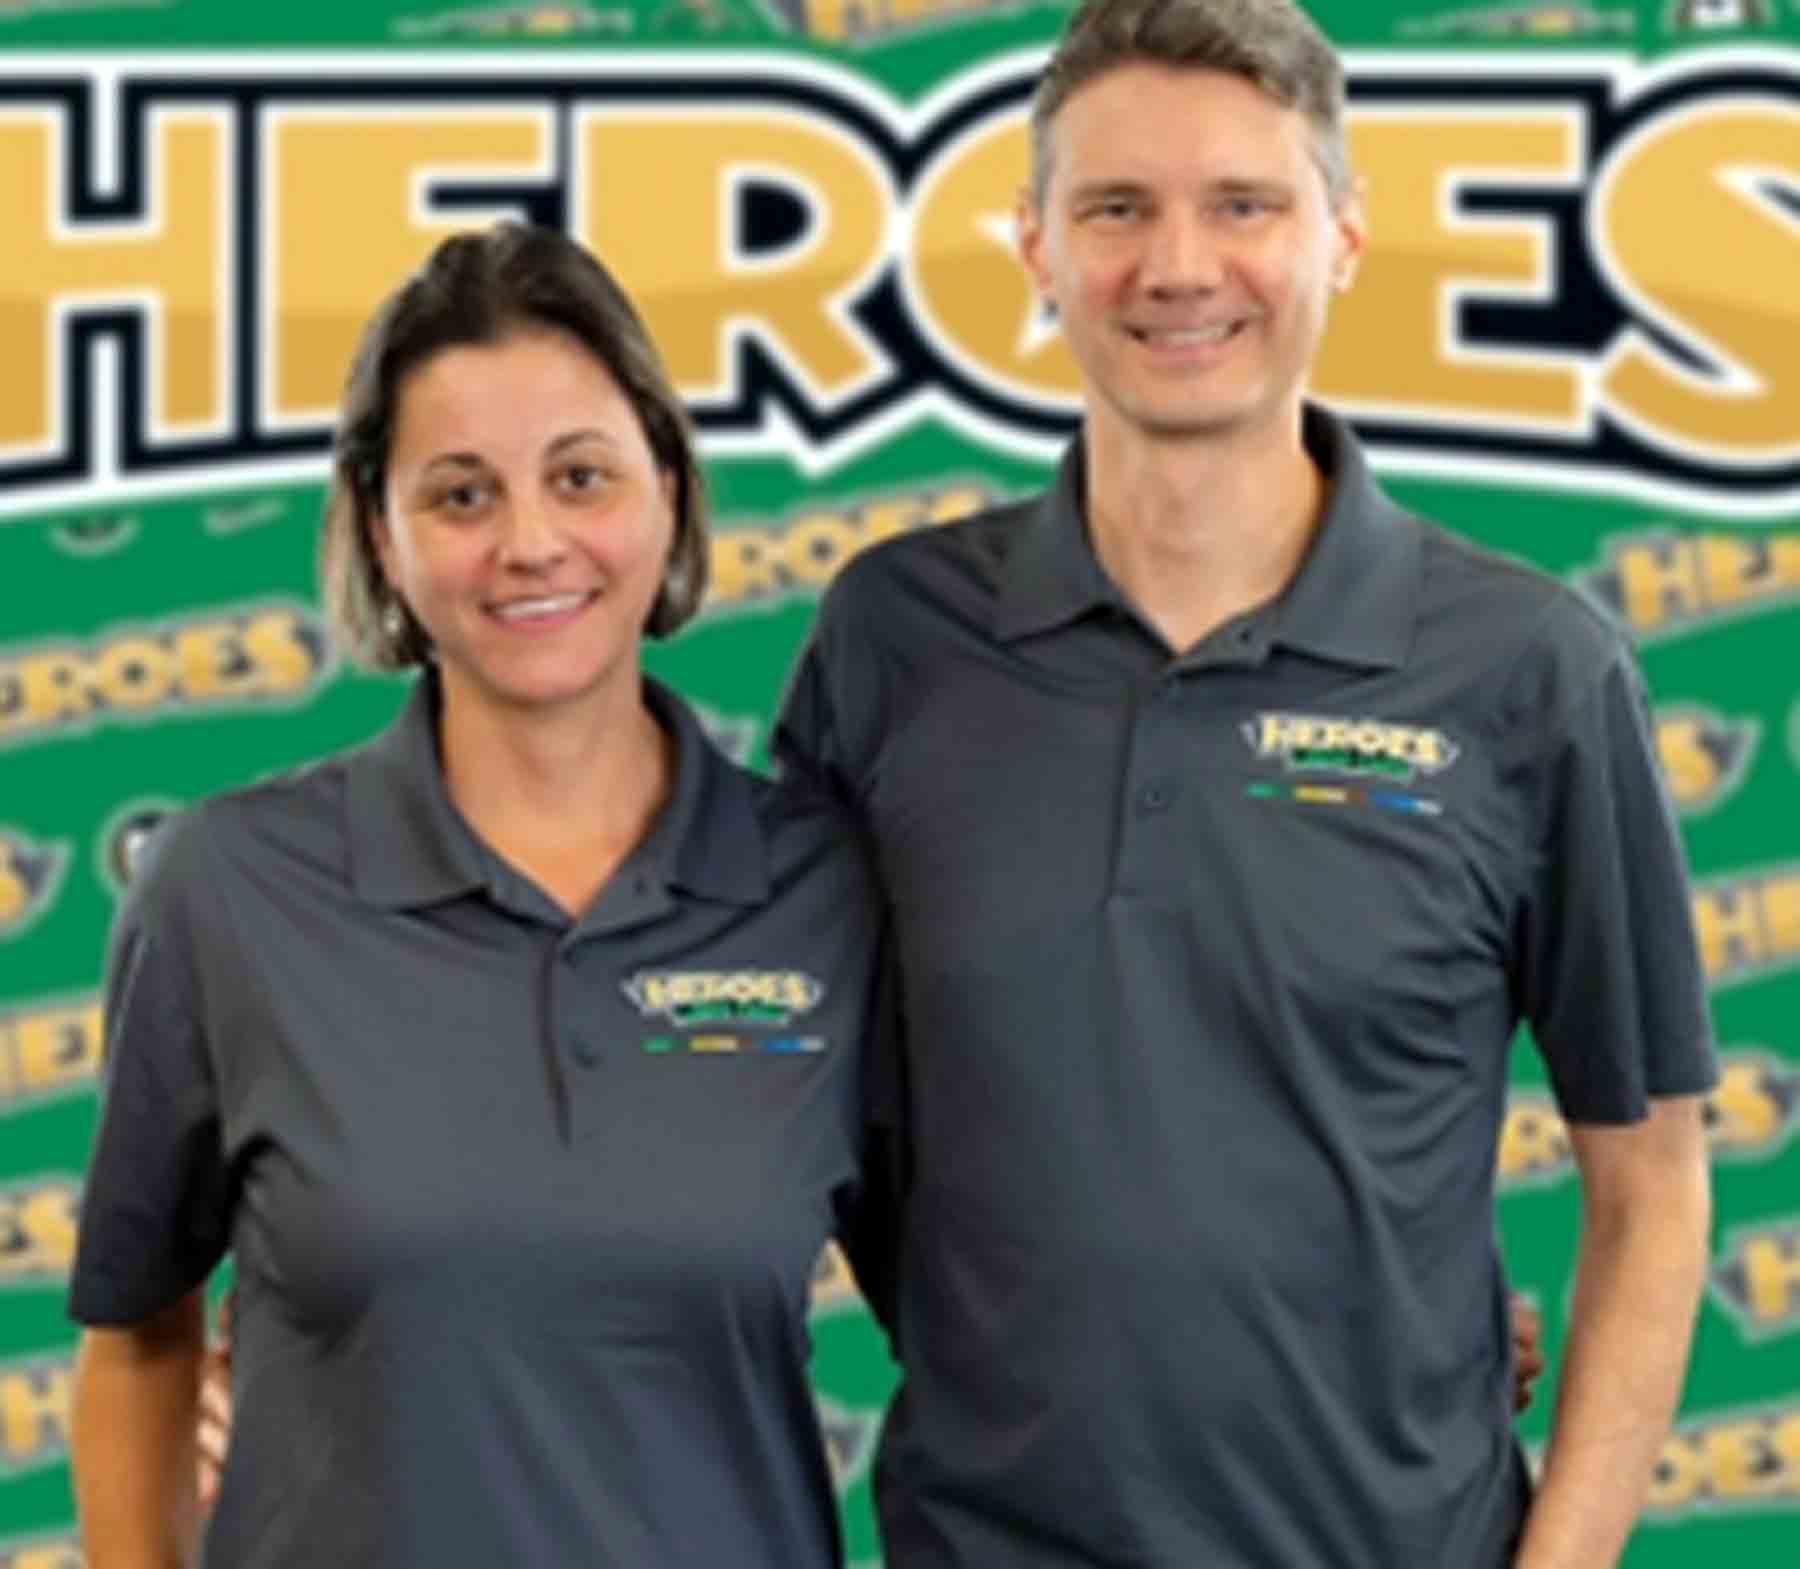 Brad and Fernanda Buinicky are standing together with Heroes Lawn Care signage in the background.